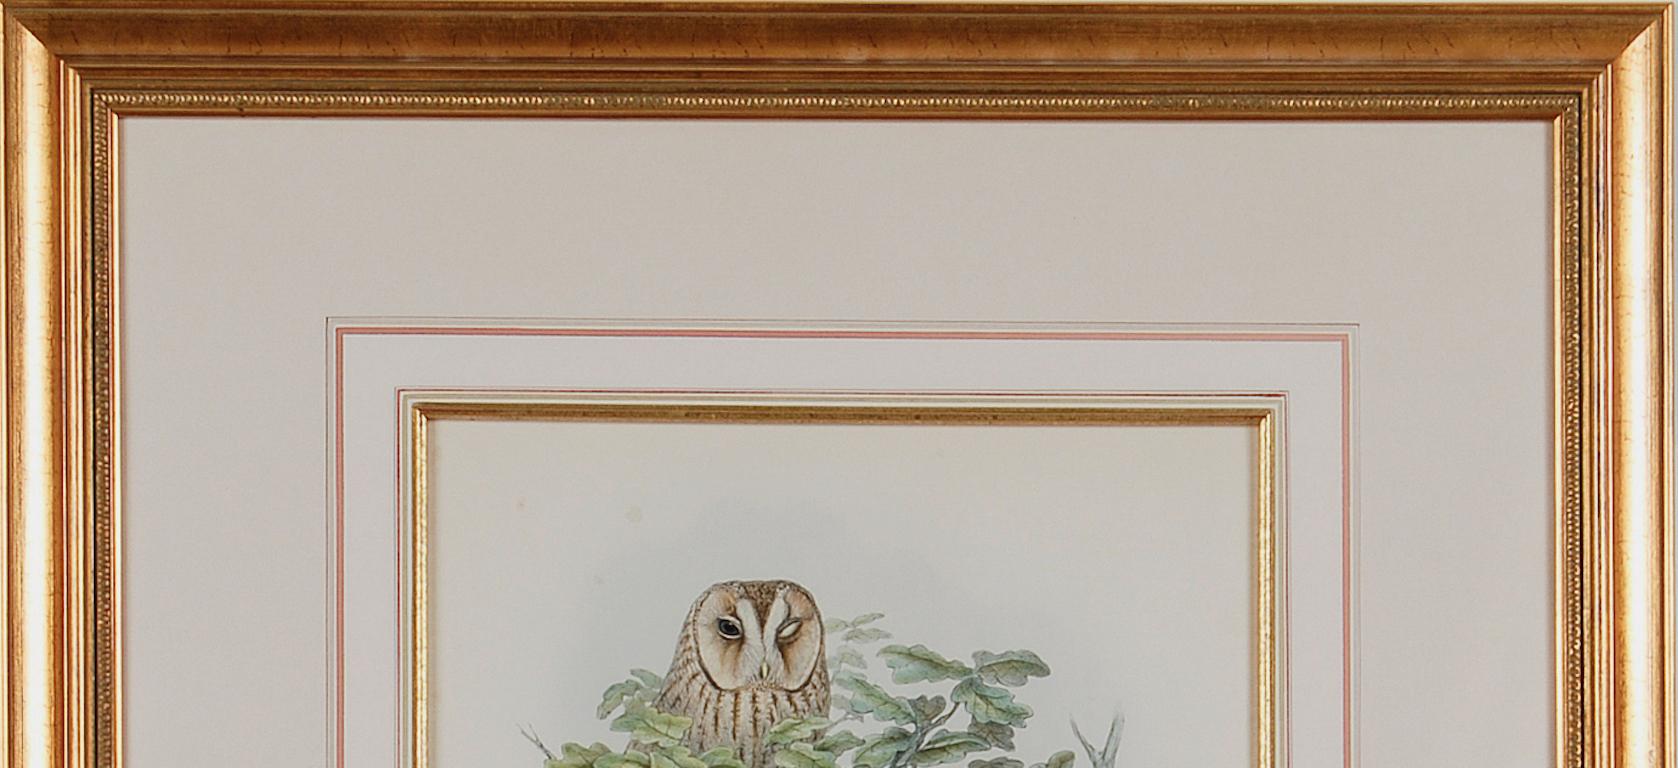 Tawny or Brown Owl: A Framed Original 19th C. Hand-colored Lithograph by Gould - Naturalistic Print by John Gould and Henry Constantine Richter